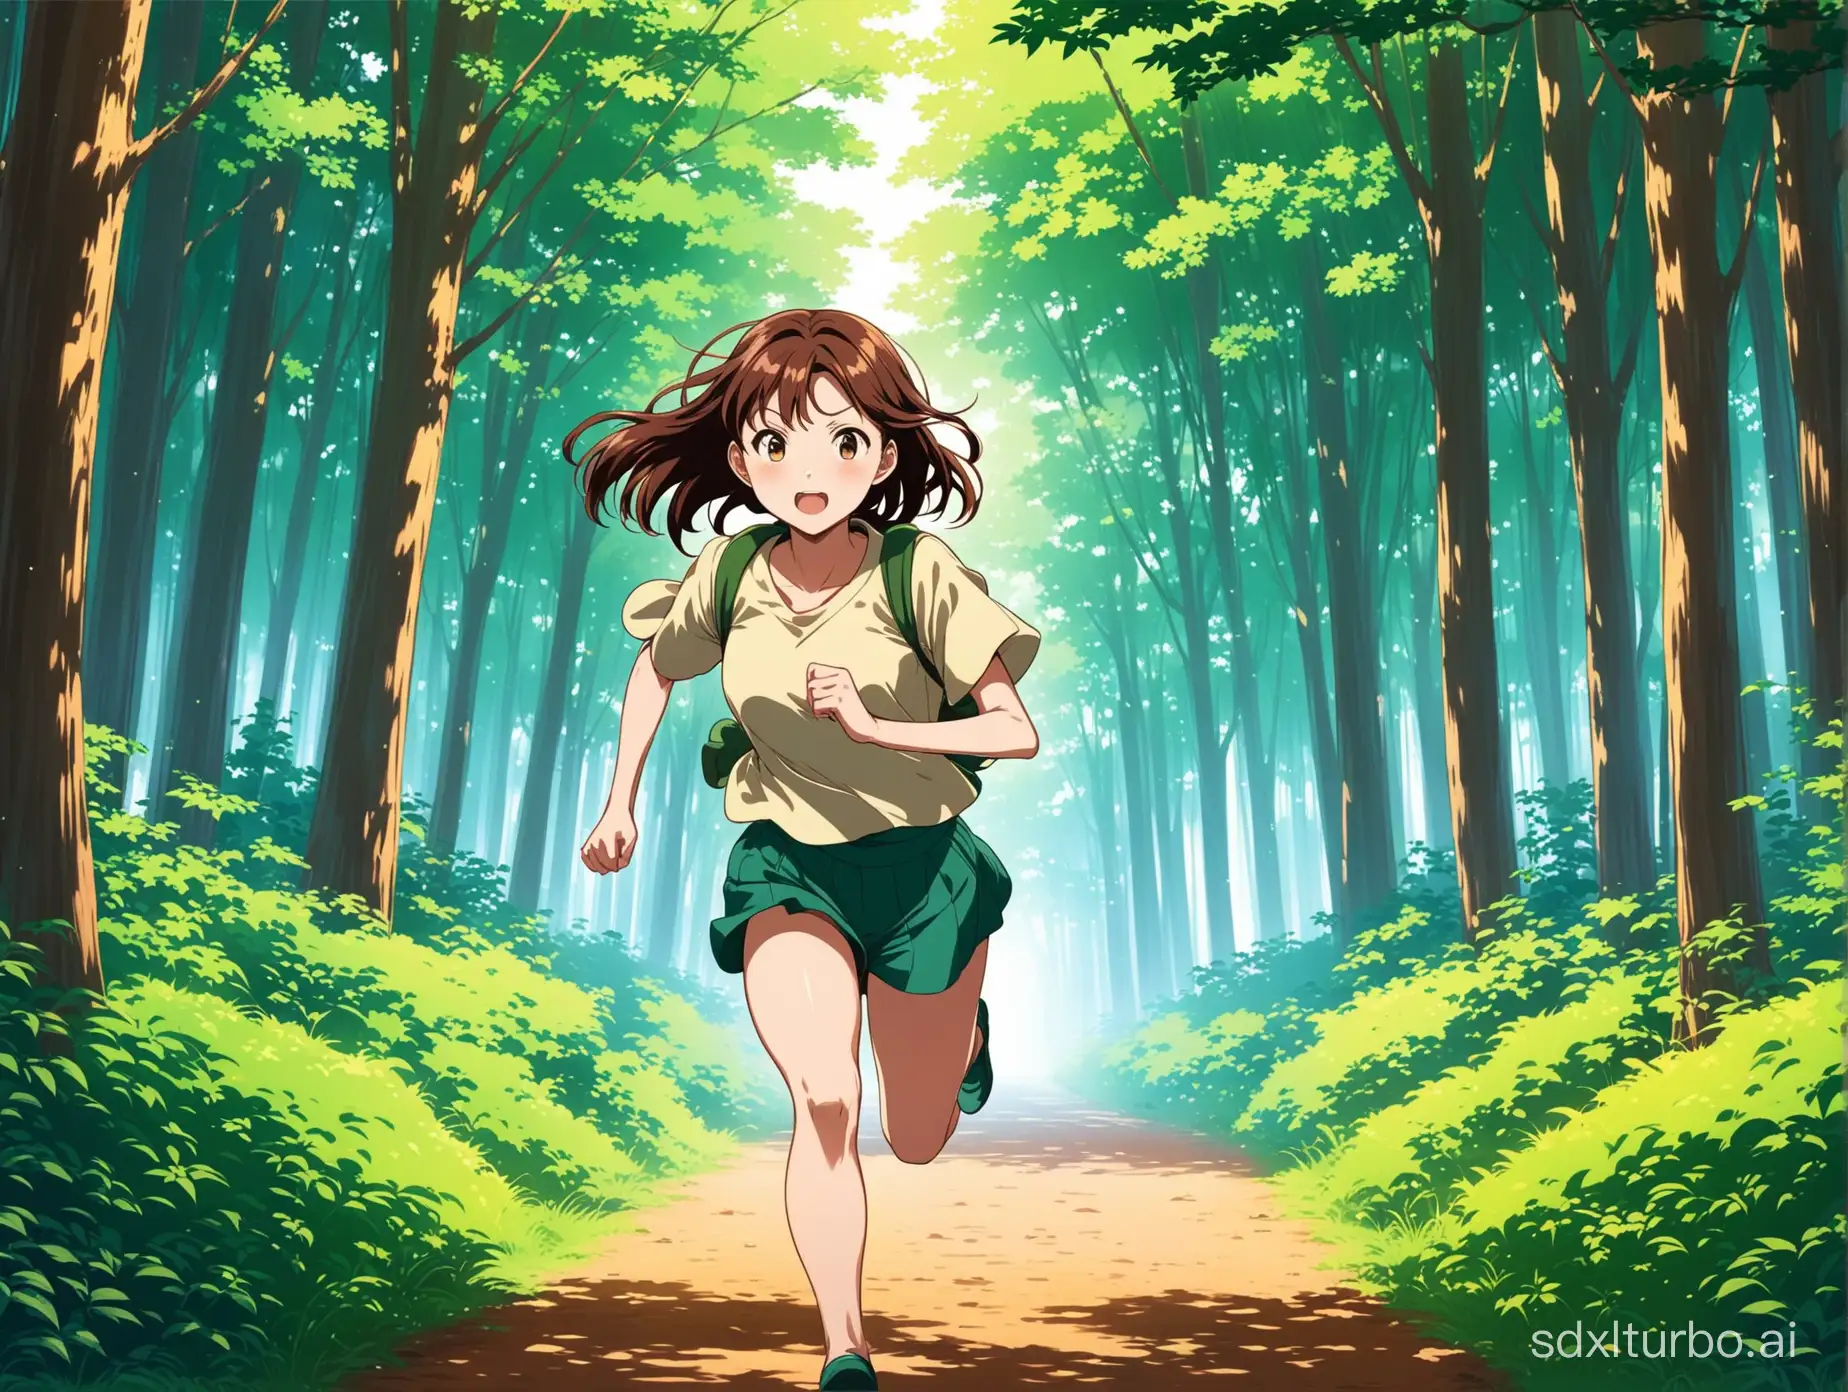 Japanese anime style，a girl is running in the forest